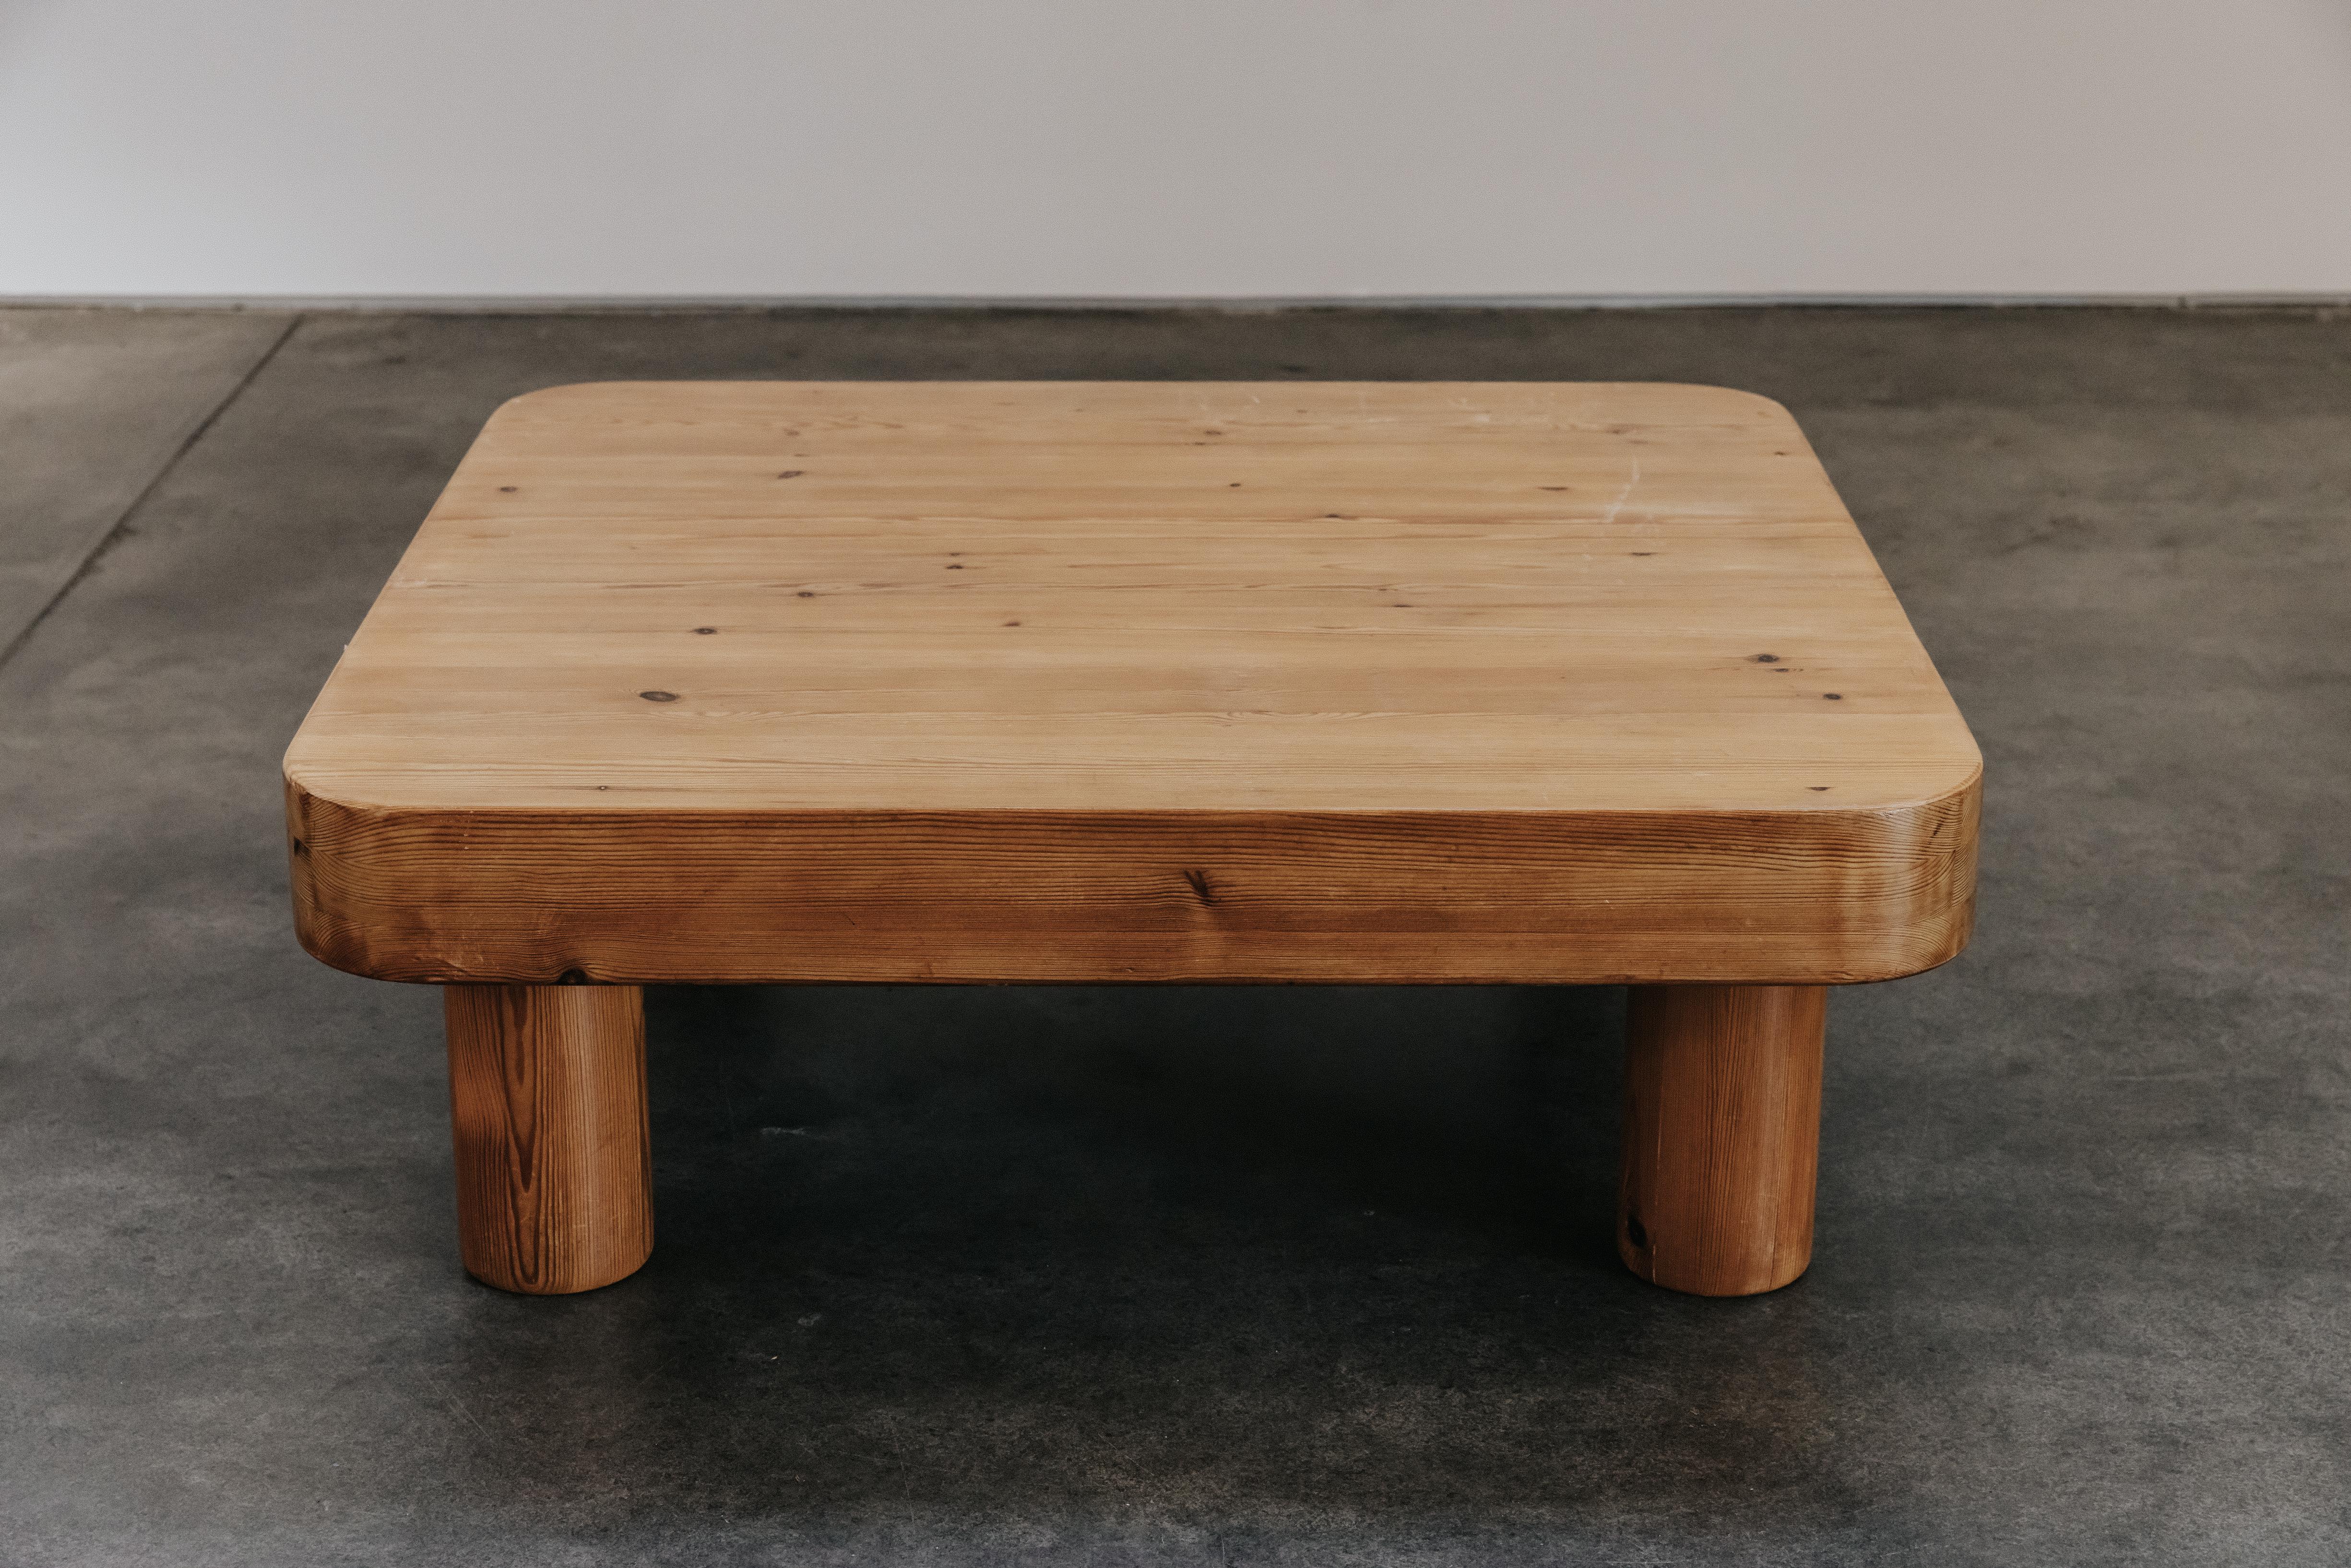 Vintage Pine Coffee Table From France, Circa 1960.  Solid pine construction with nice light wear and use.